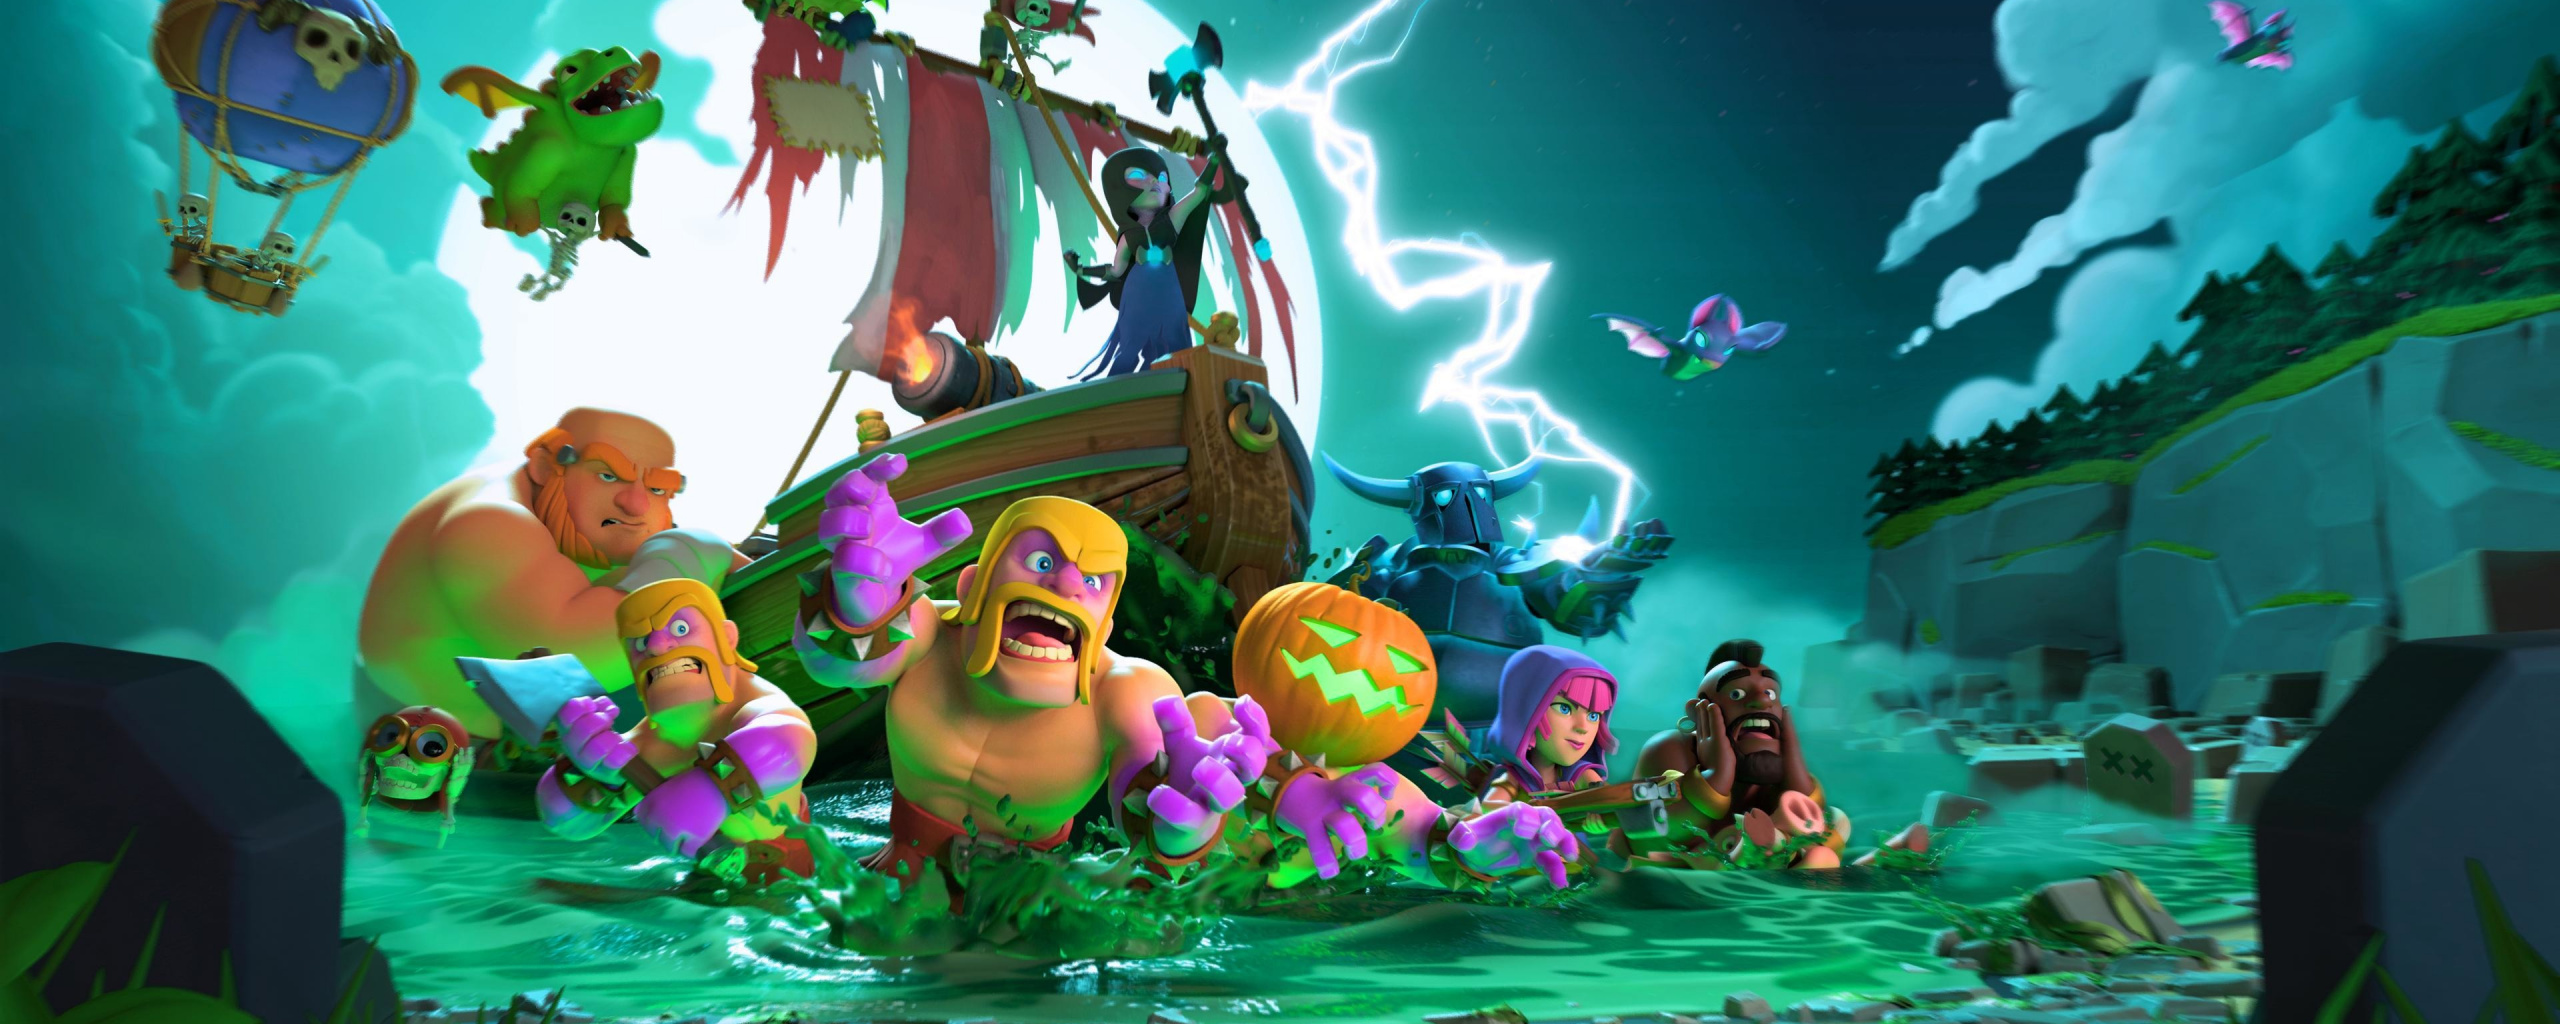 Clash Of Clans, Mobile Game, Halloween, Wallpaper - Clash Of Clans Imagen Full Hd , HD Wallpaper & Backgrounds